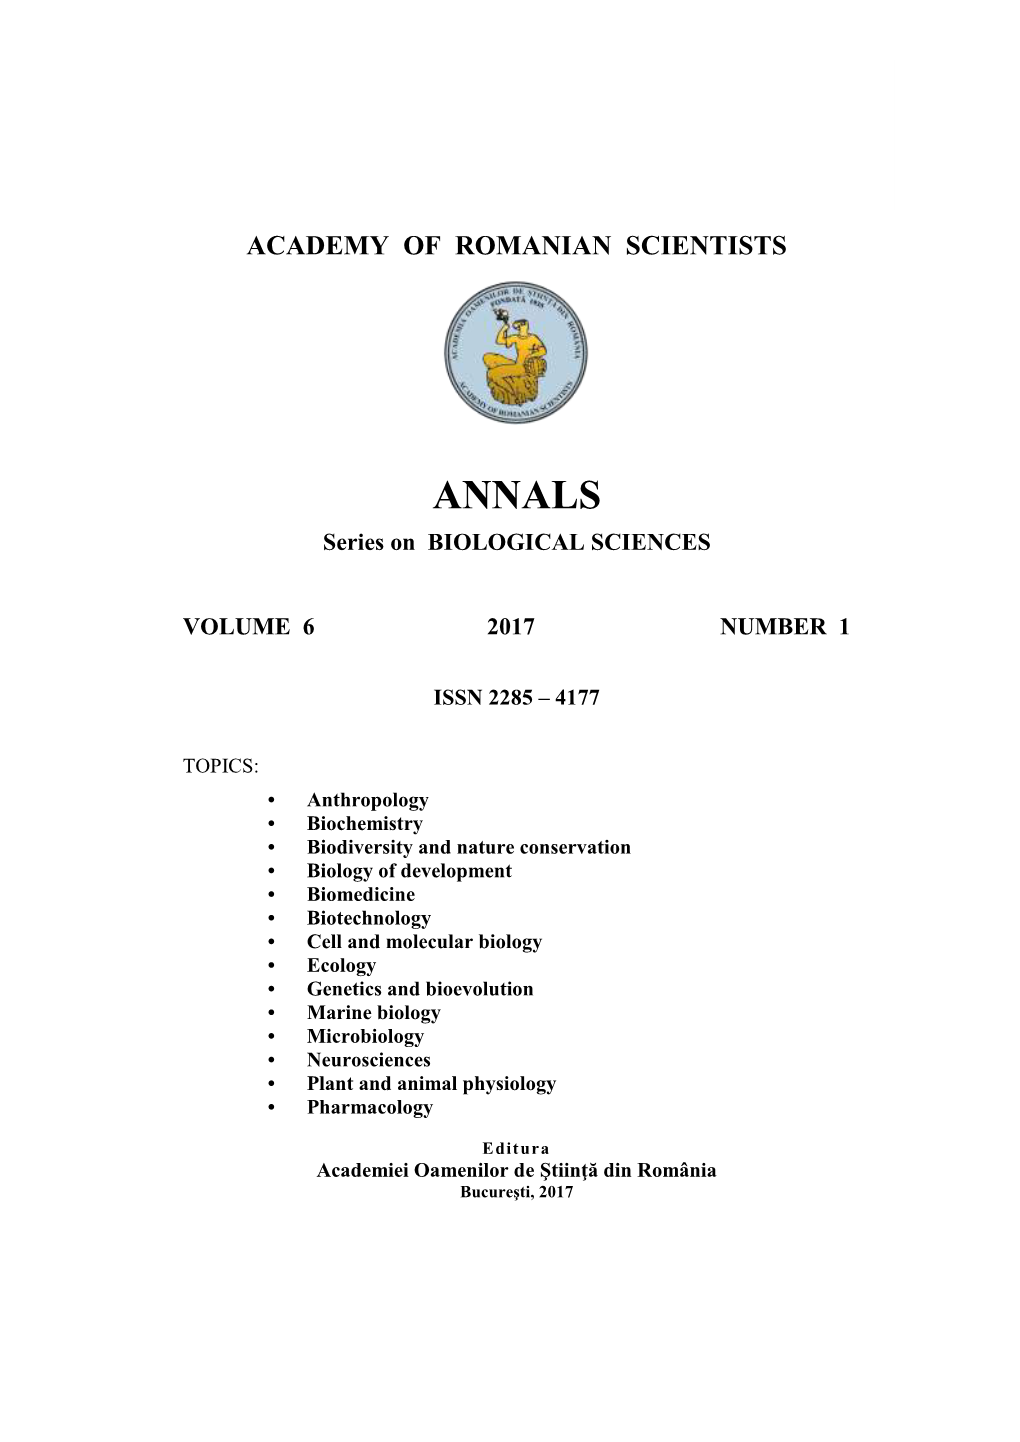 Annals Series on Biological Sciences ISSN 2285 – 4177 Copyright ©2017 Academy of Romanian Scientist